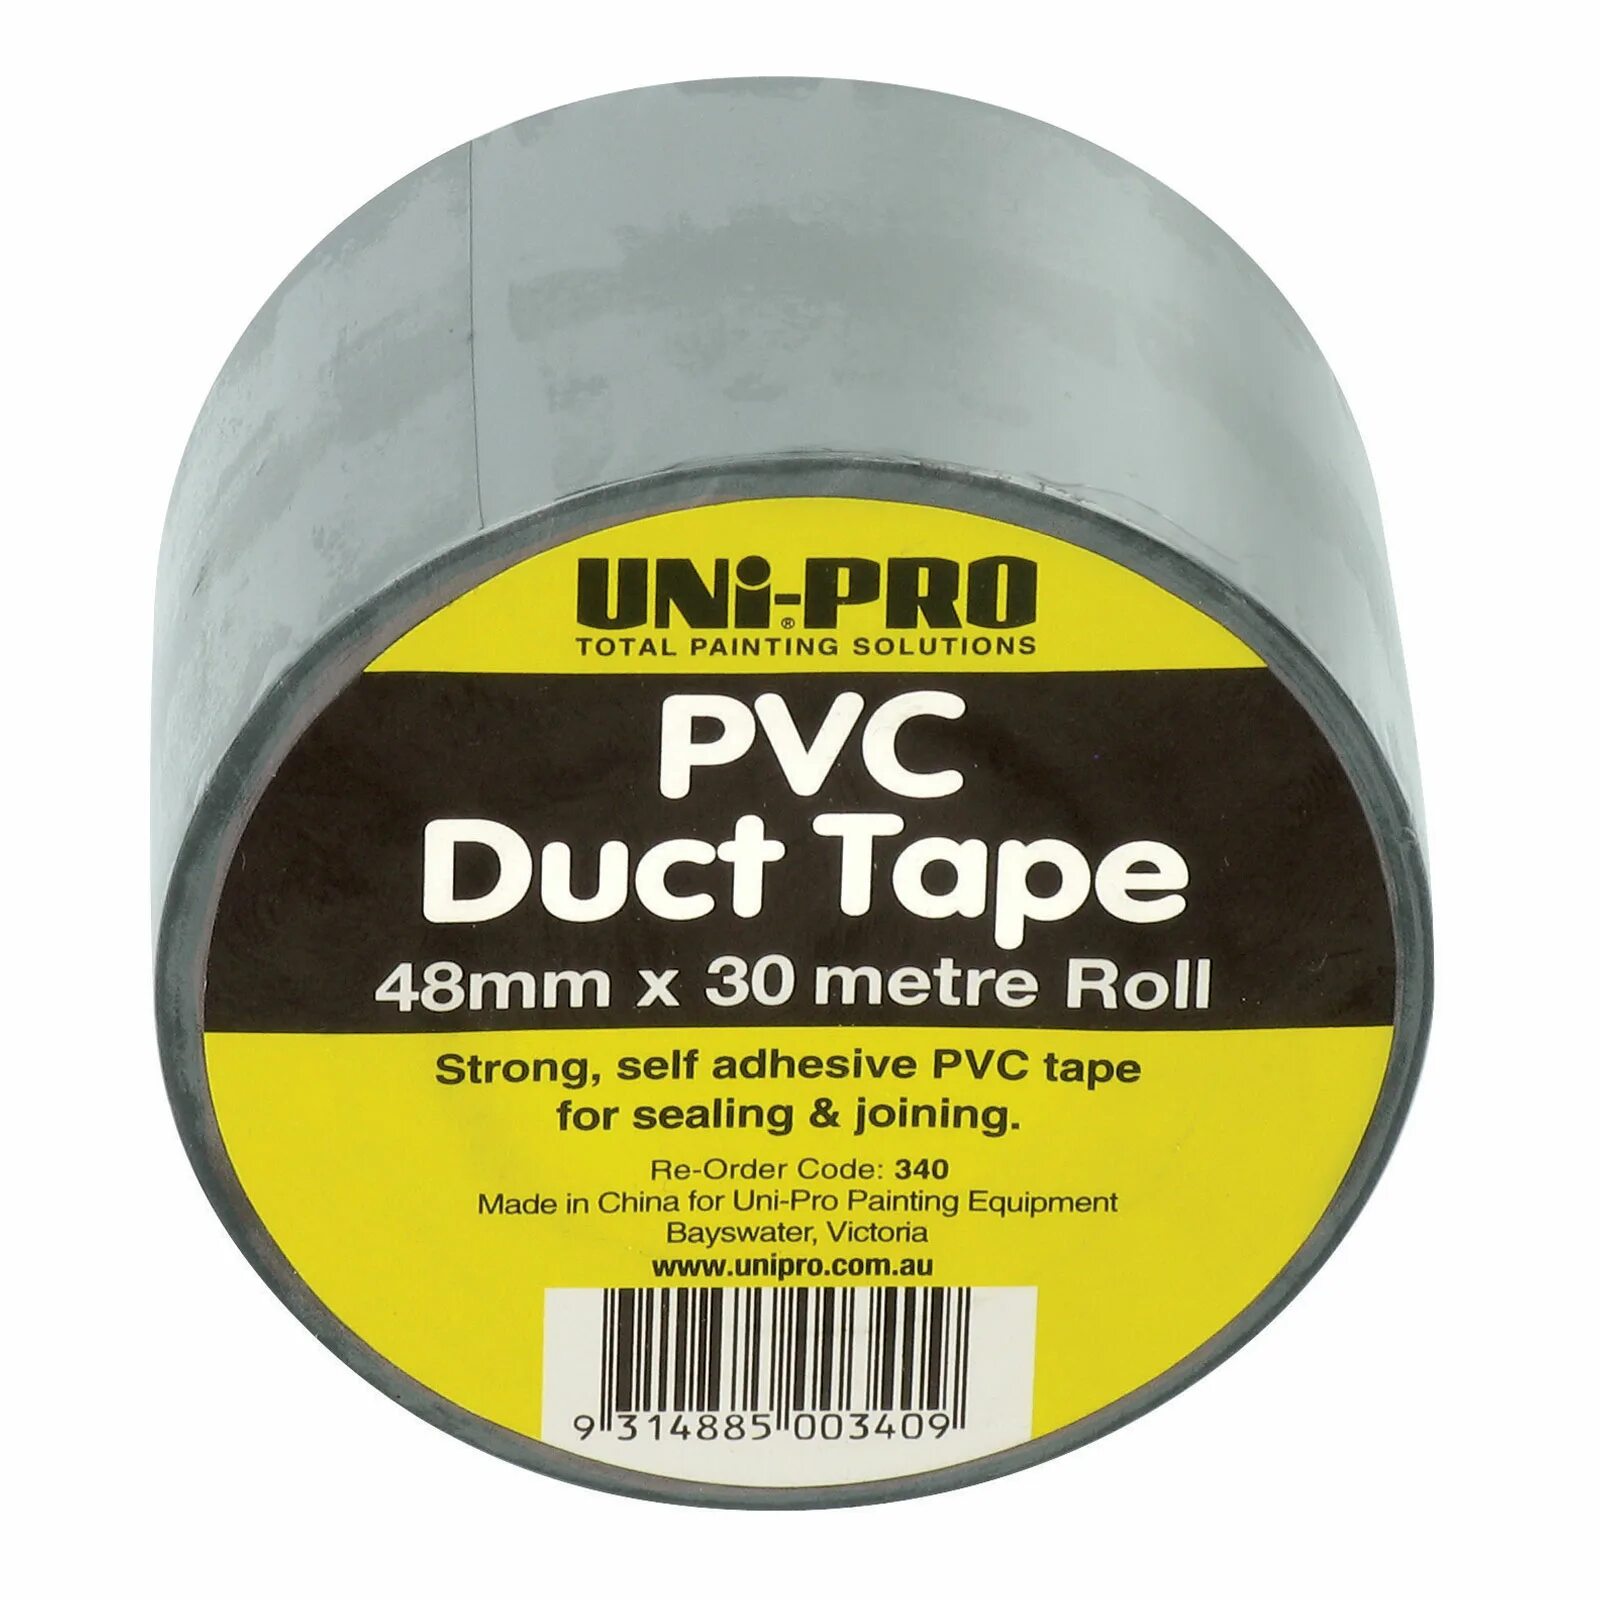 Pvc pro. Duct Tape. Duct Tape Duct. Одежда Duct Tape. PVC Duct.